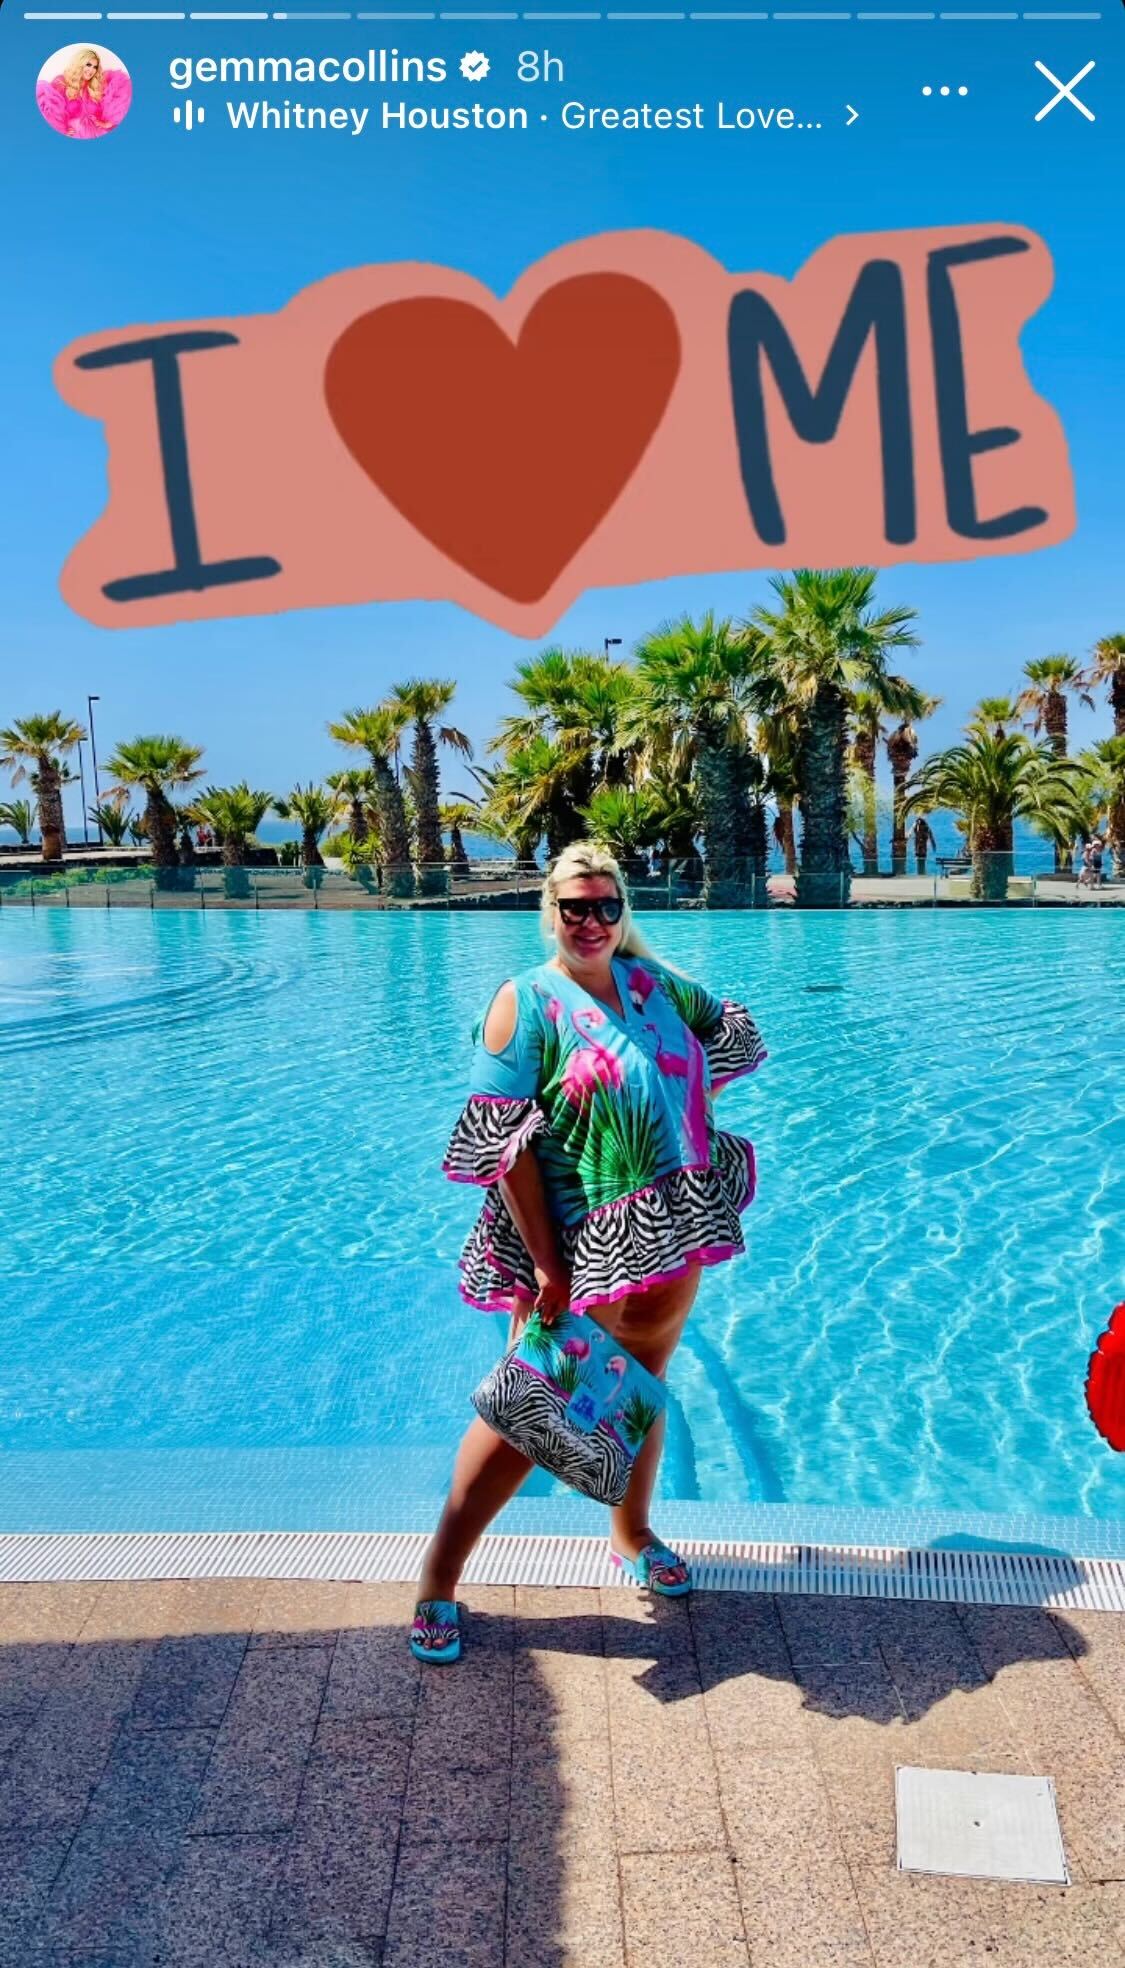 Gemma Collins has encouraged people to love themselves this Valentine’s Day